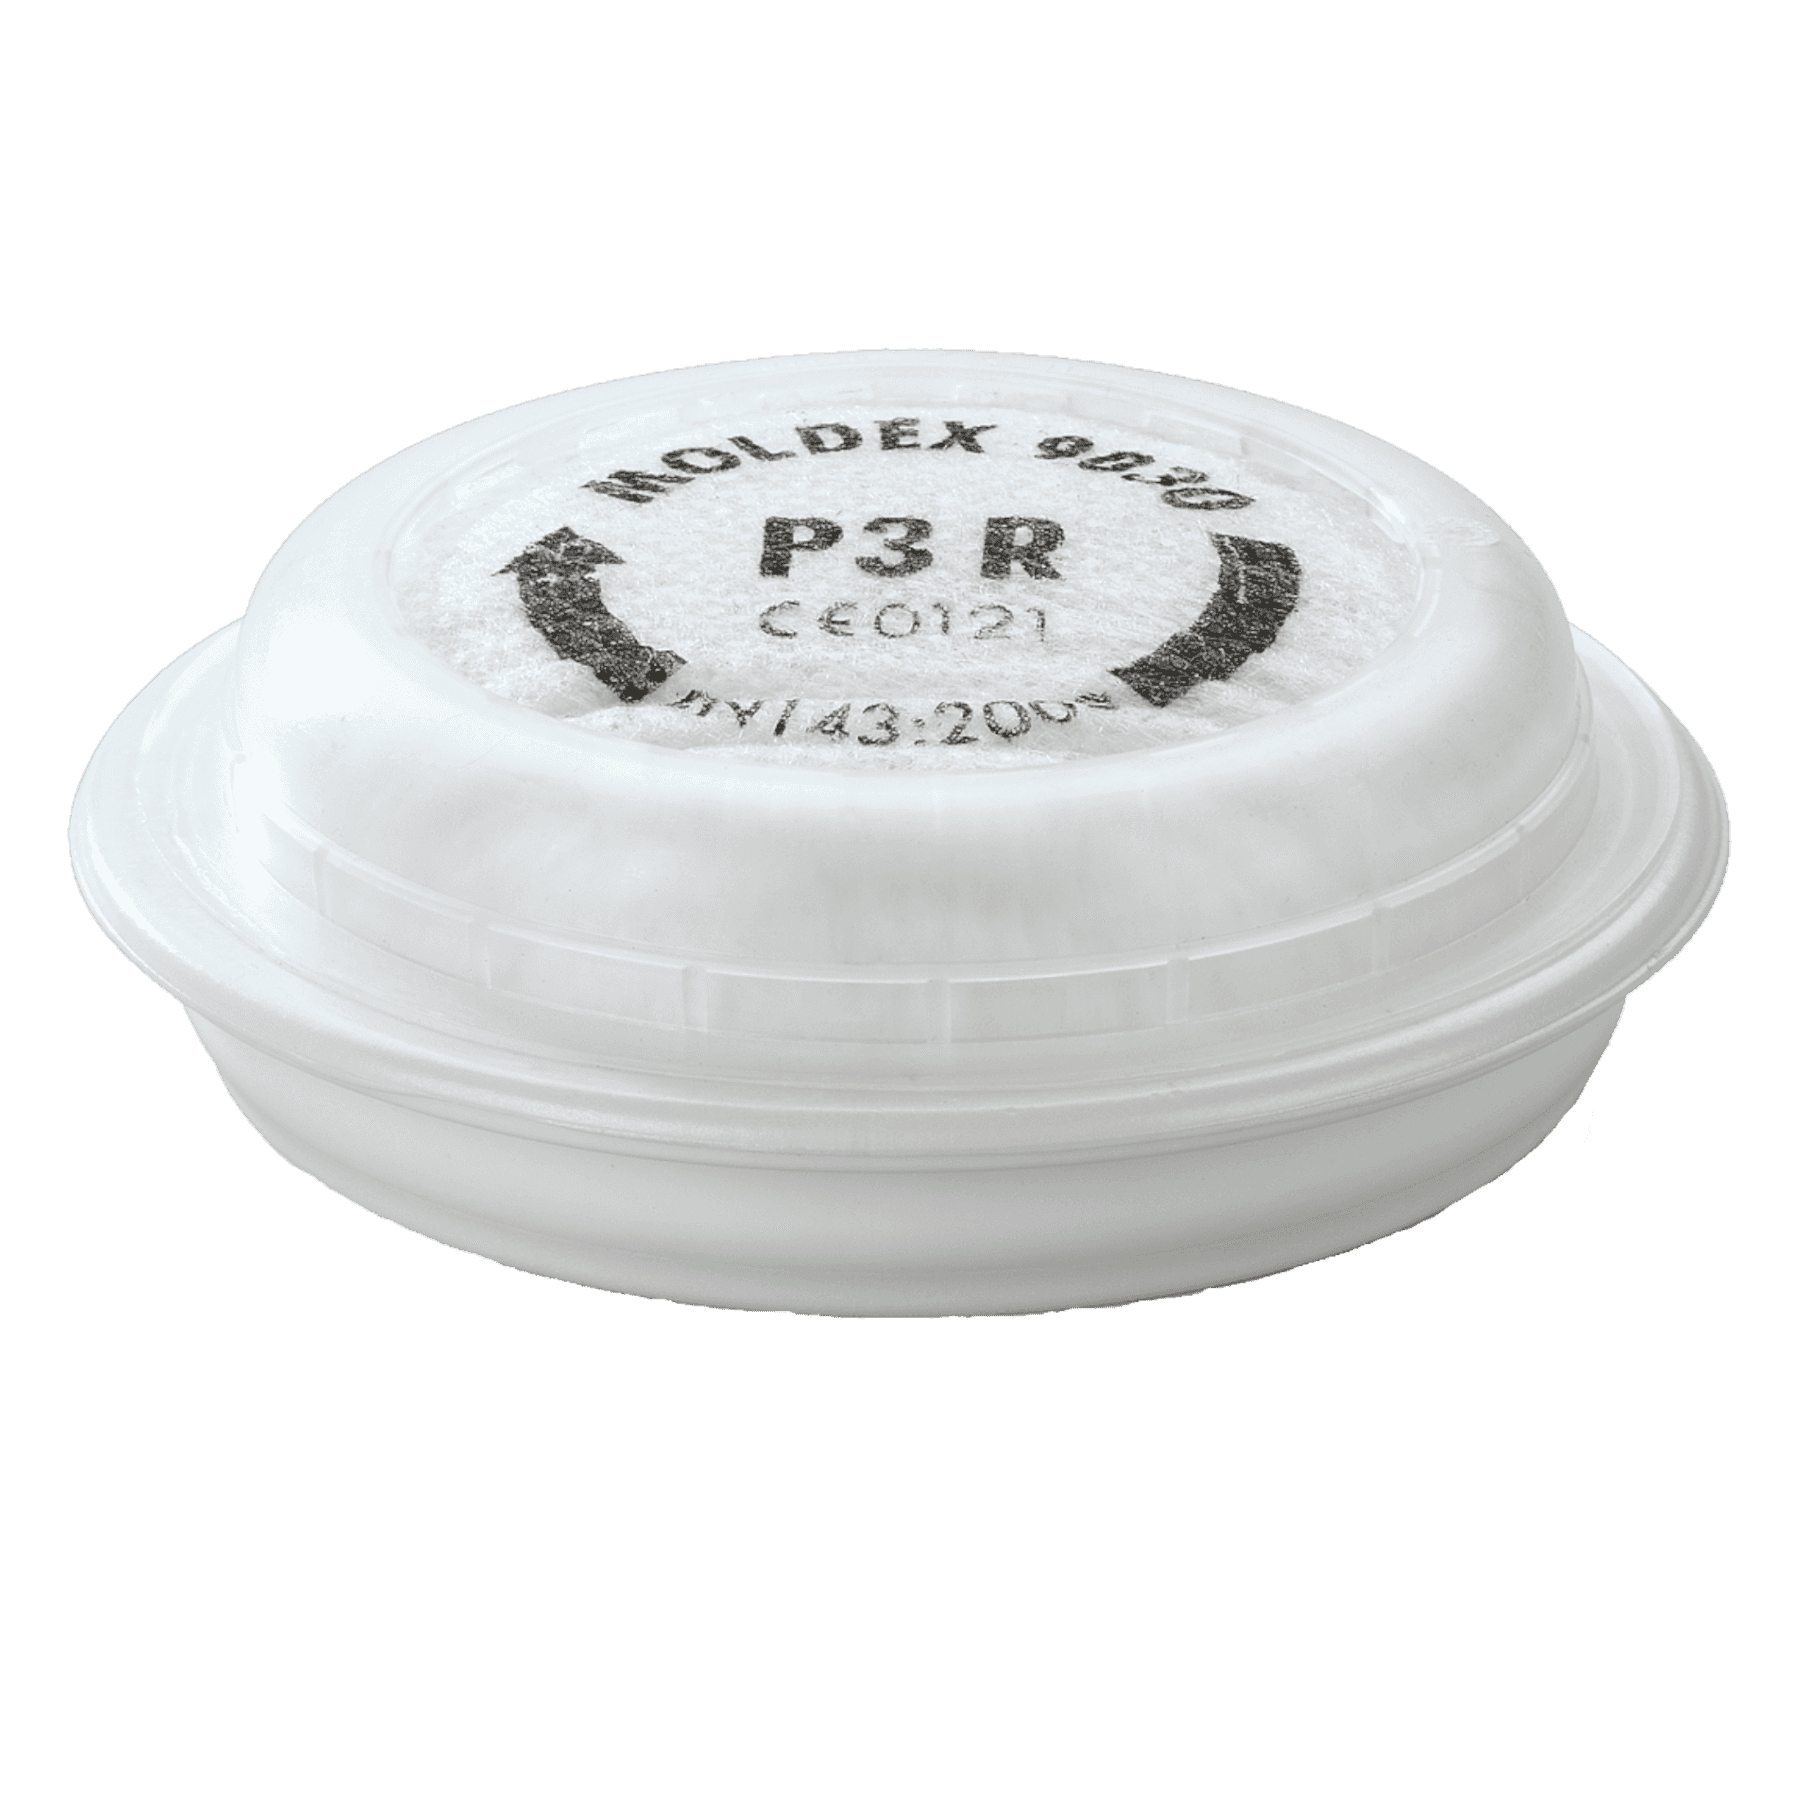 EasyLock P3 R Particulate Filter - Pack of 12